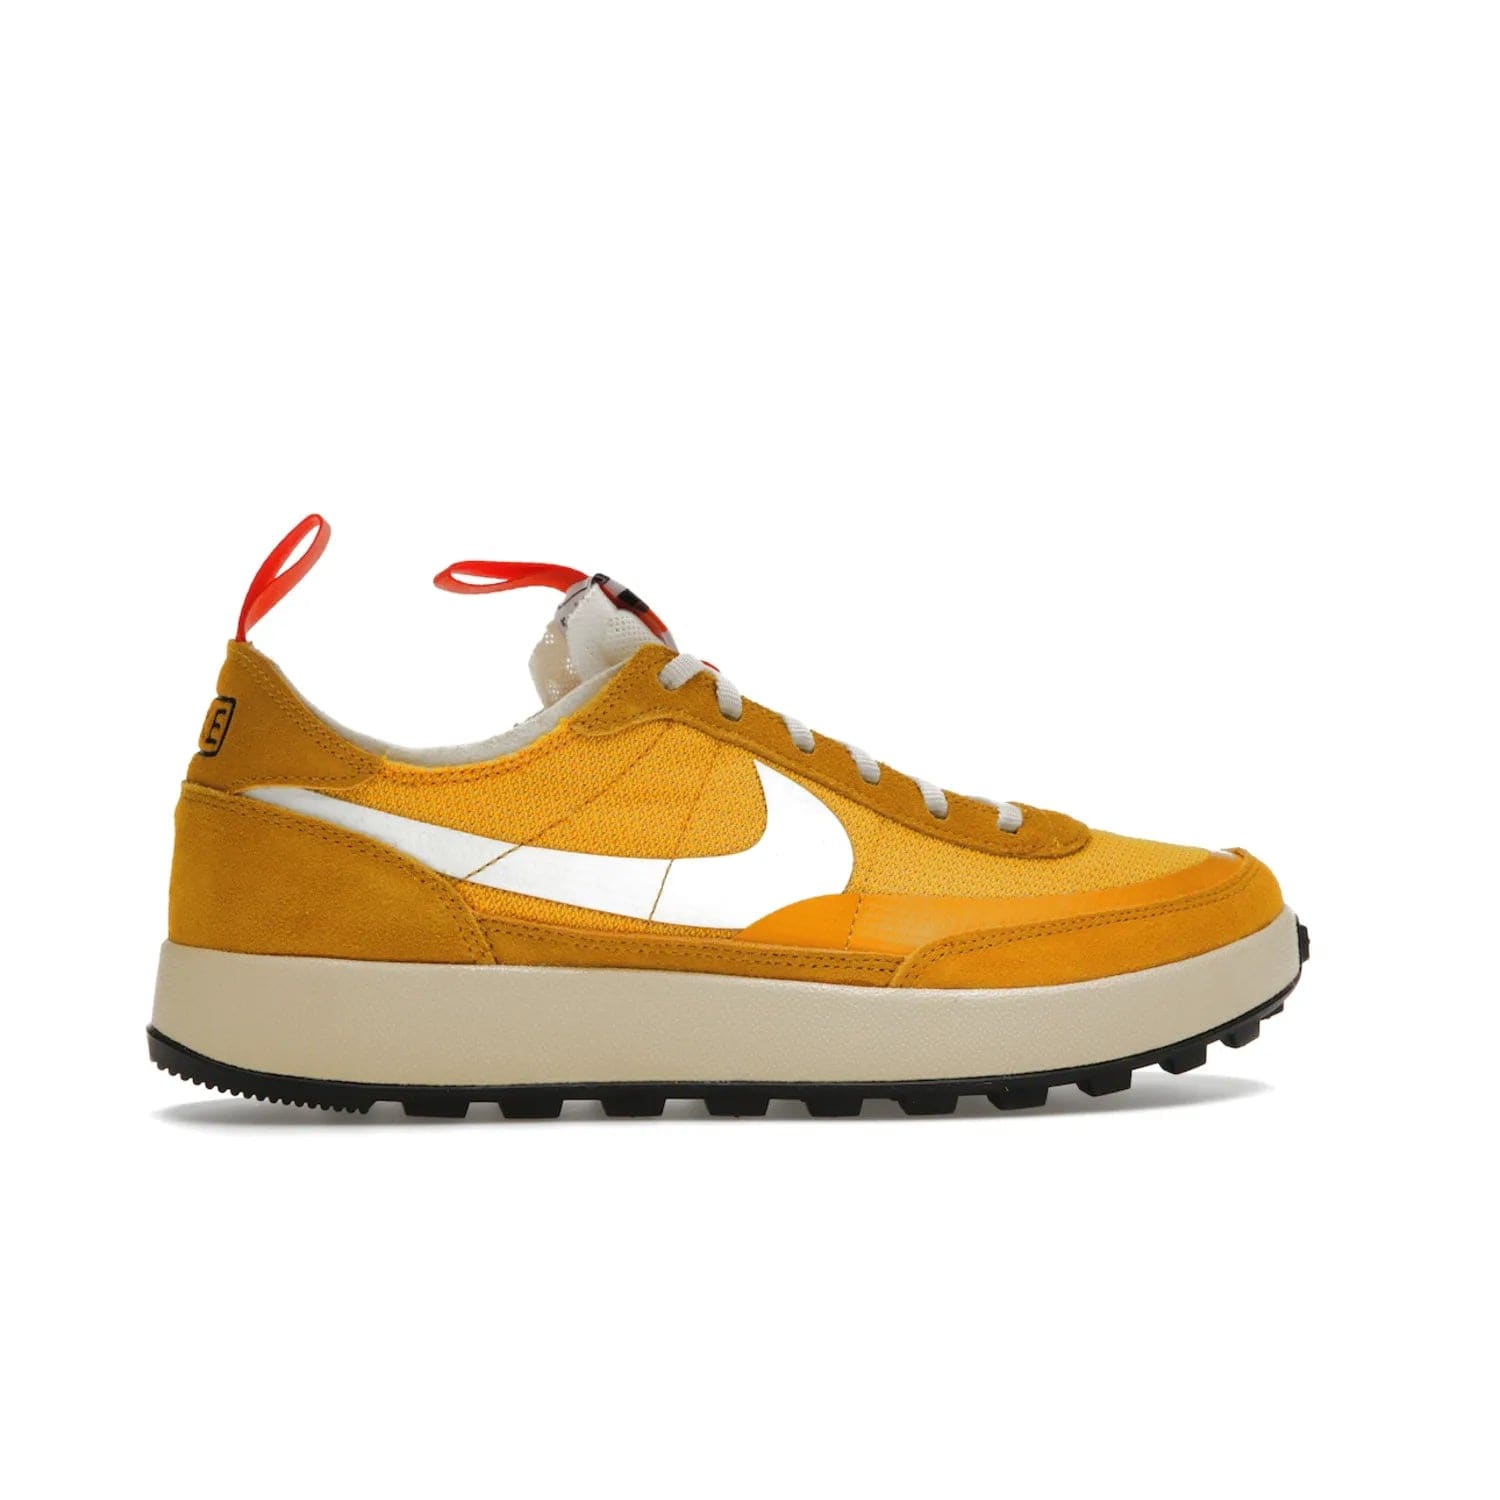 NikeCraft General Purpose Shoe Tom Sachs Archive Dark Sulfur - Image 36 - Only at www.BallersClubKickz.com - Collab between Nike & Tom Sachs. The NikeCraft General Purpose Shoe features dark sulfur mesh upper, suede overlays, contrasting white Swoosh and orange tabs. EVA cushioning & black waffle-traction rubber outsole ensures performance. Stylish & perfect for any occasion, the shoe released September 2, 2022.